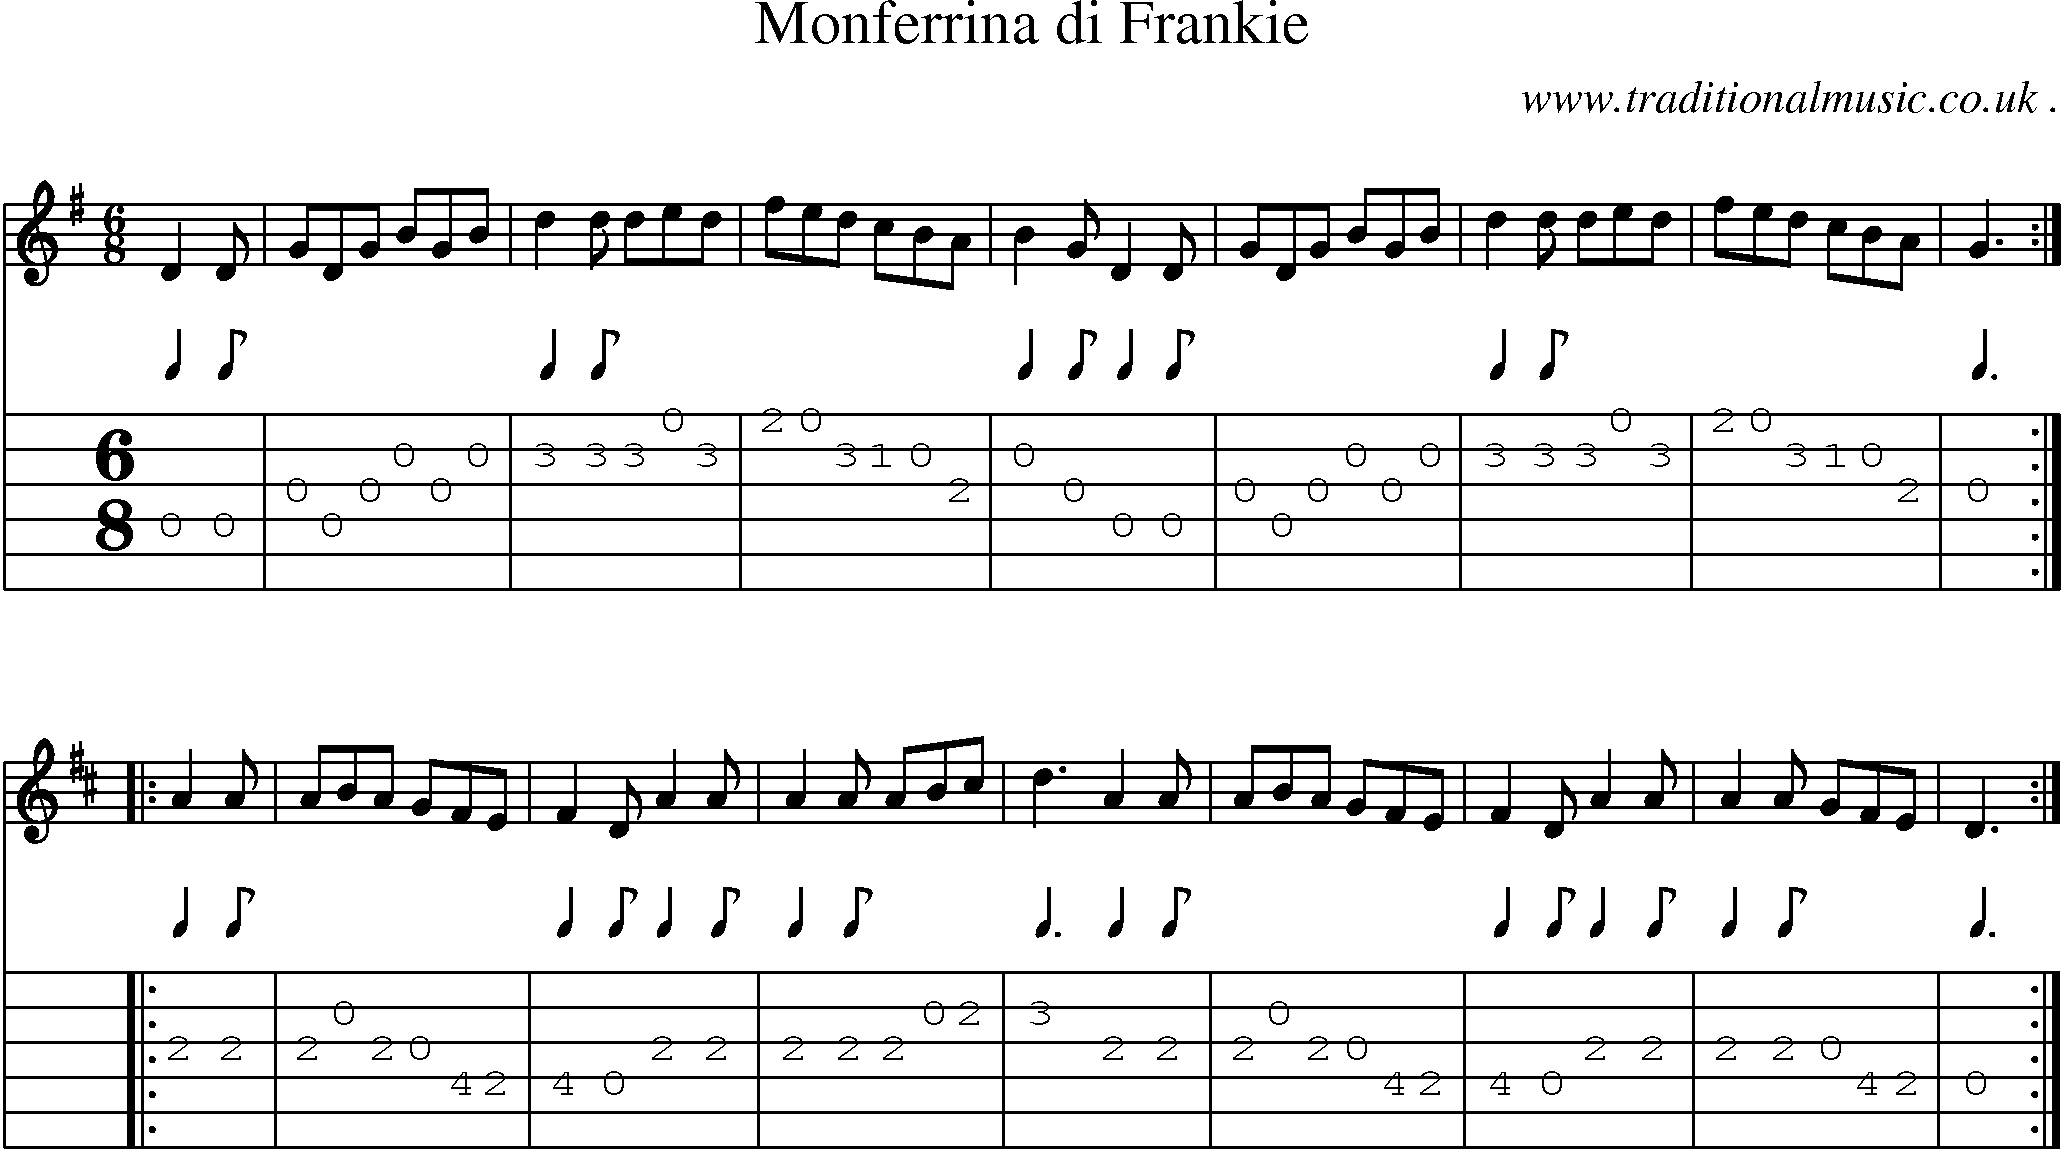 Sheet-Music and Guitar Tabs for Monferrina Di Frankie